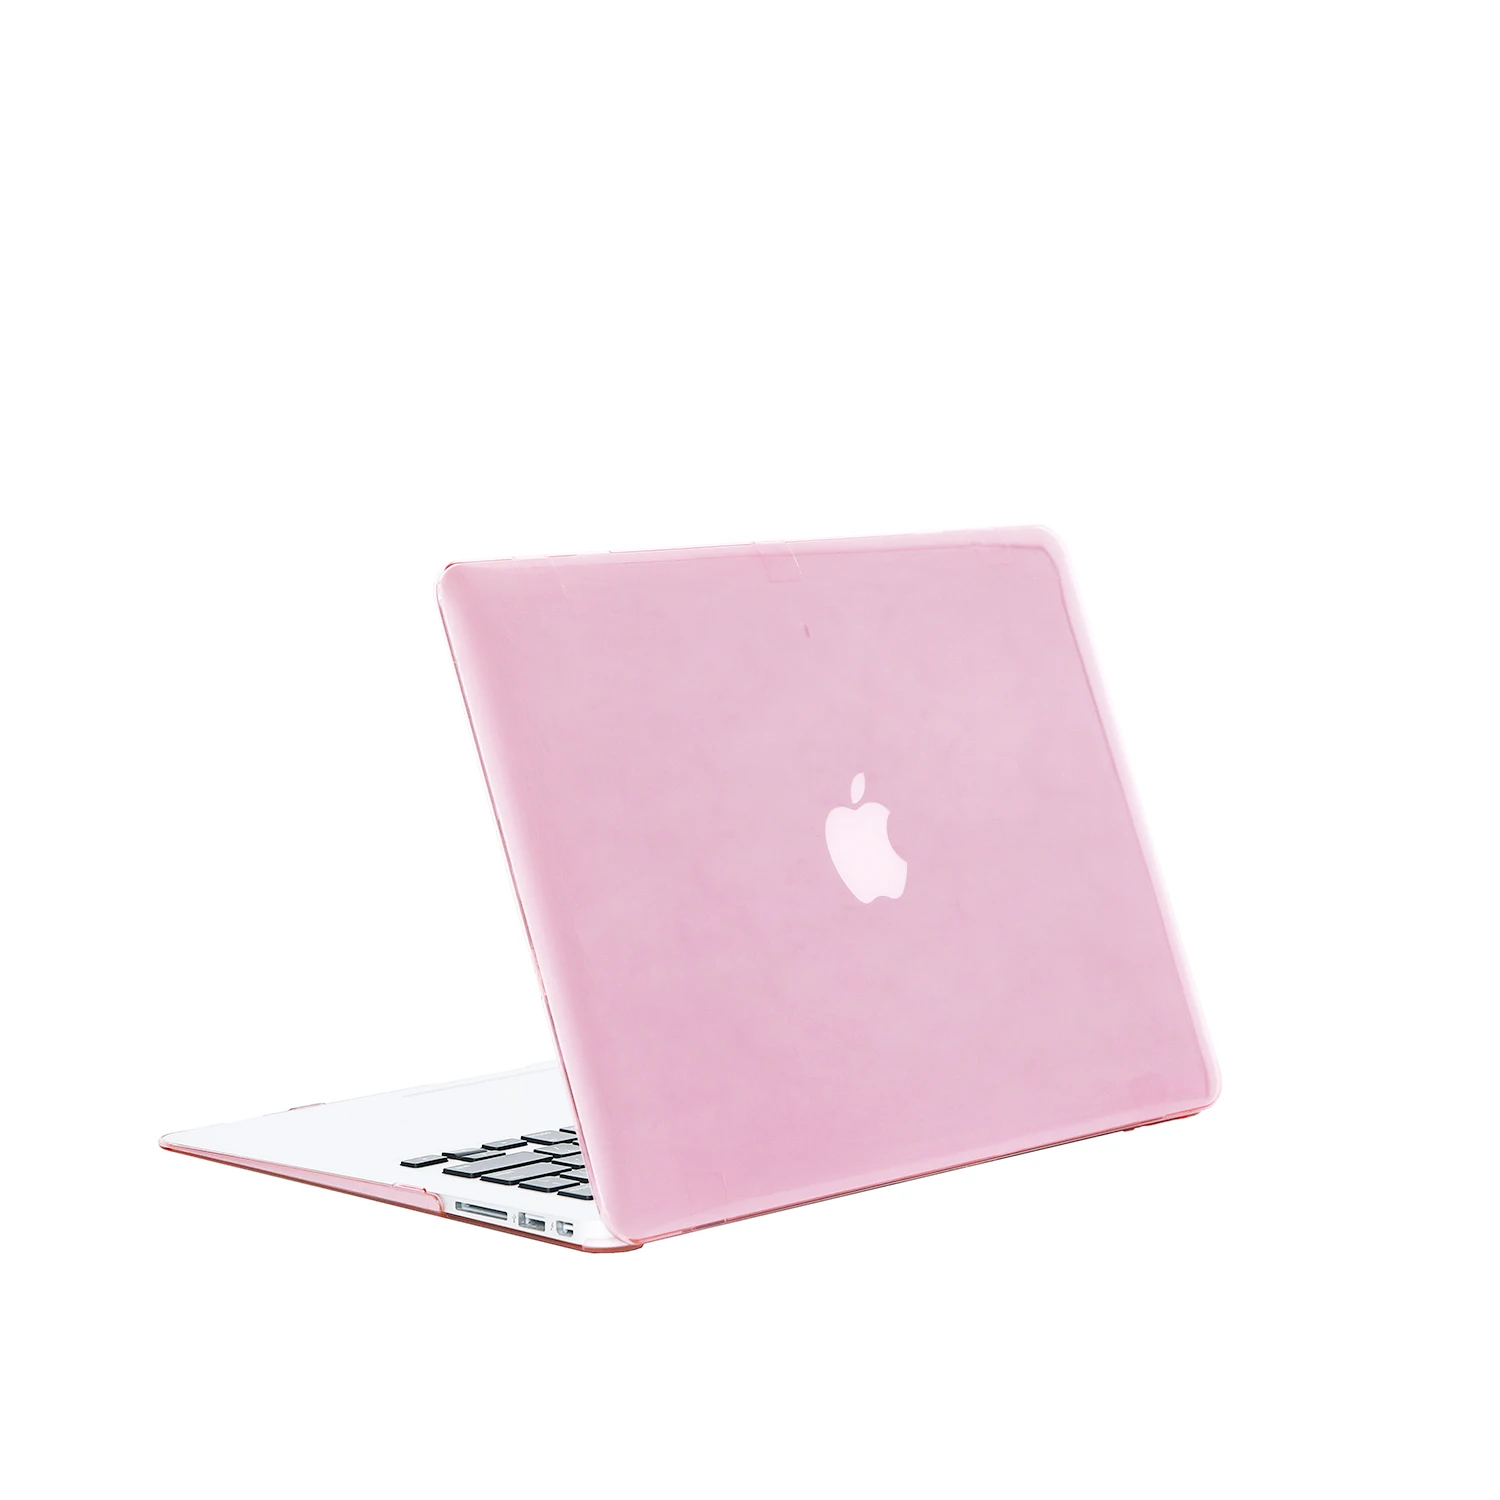 For Macbook Air Case A1370 / A1465 Plastic Hard Shell 11.6 - 13.3 Inch